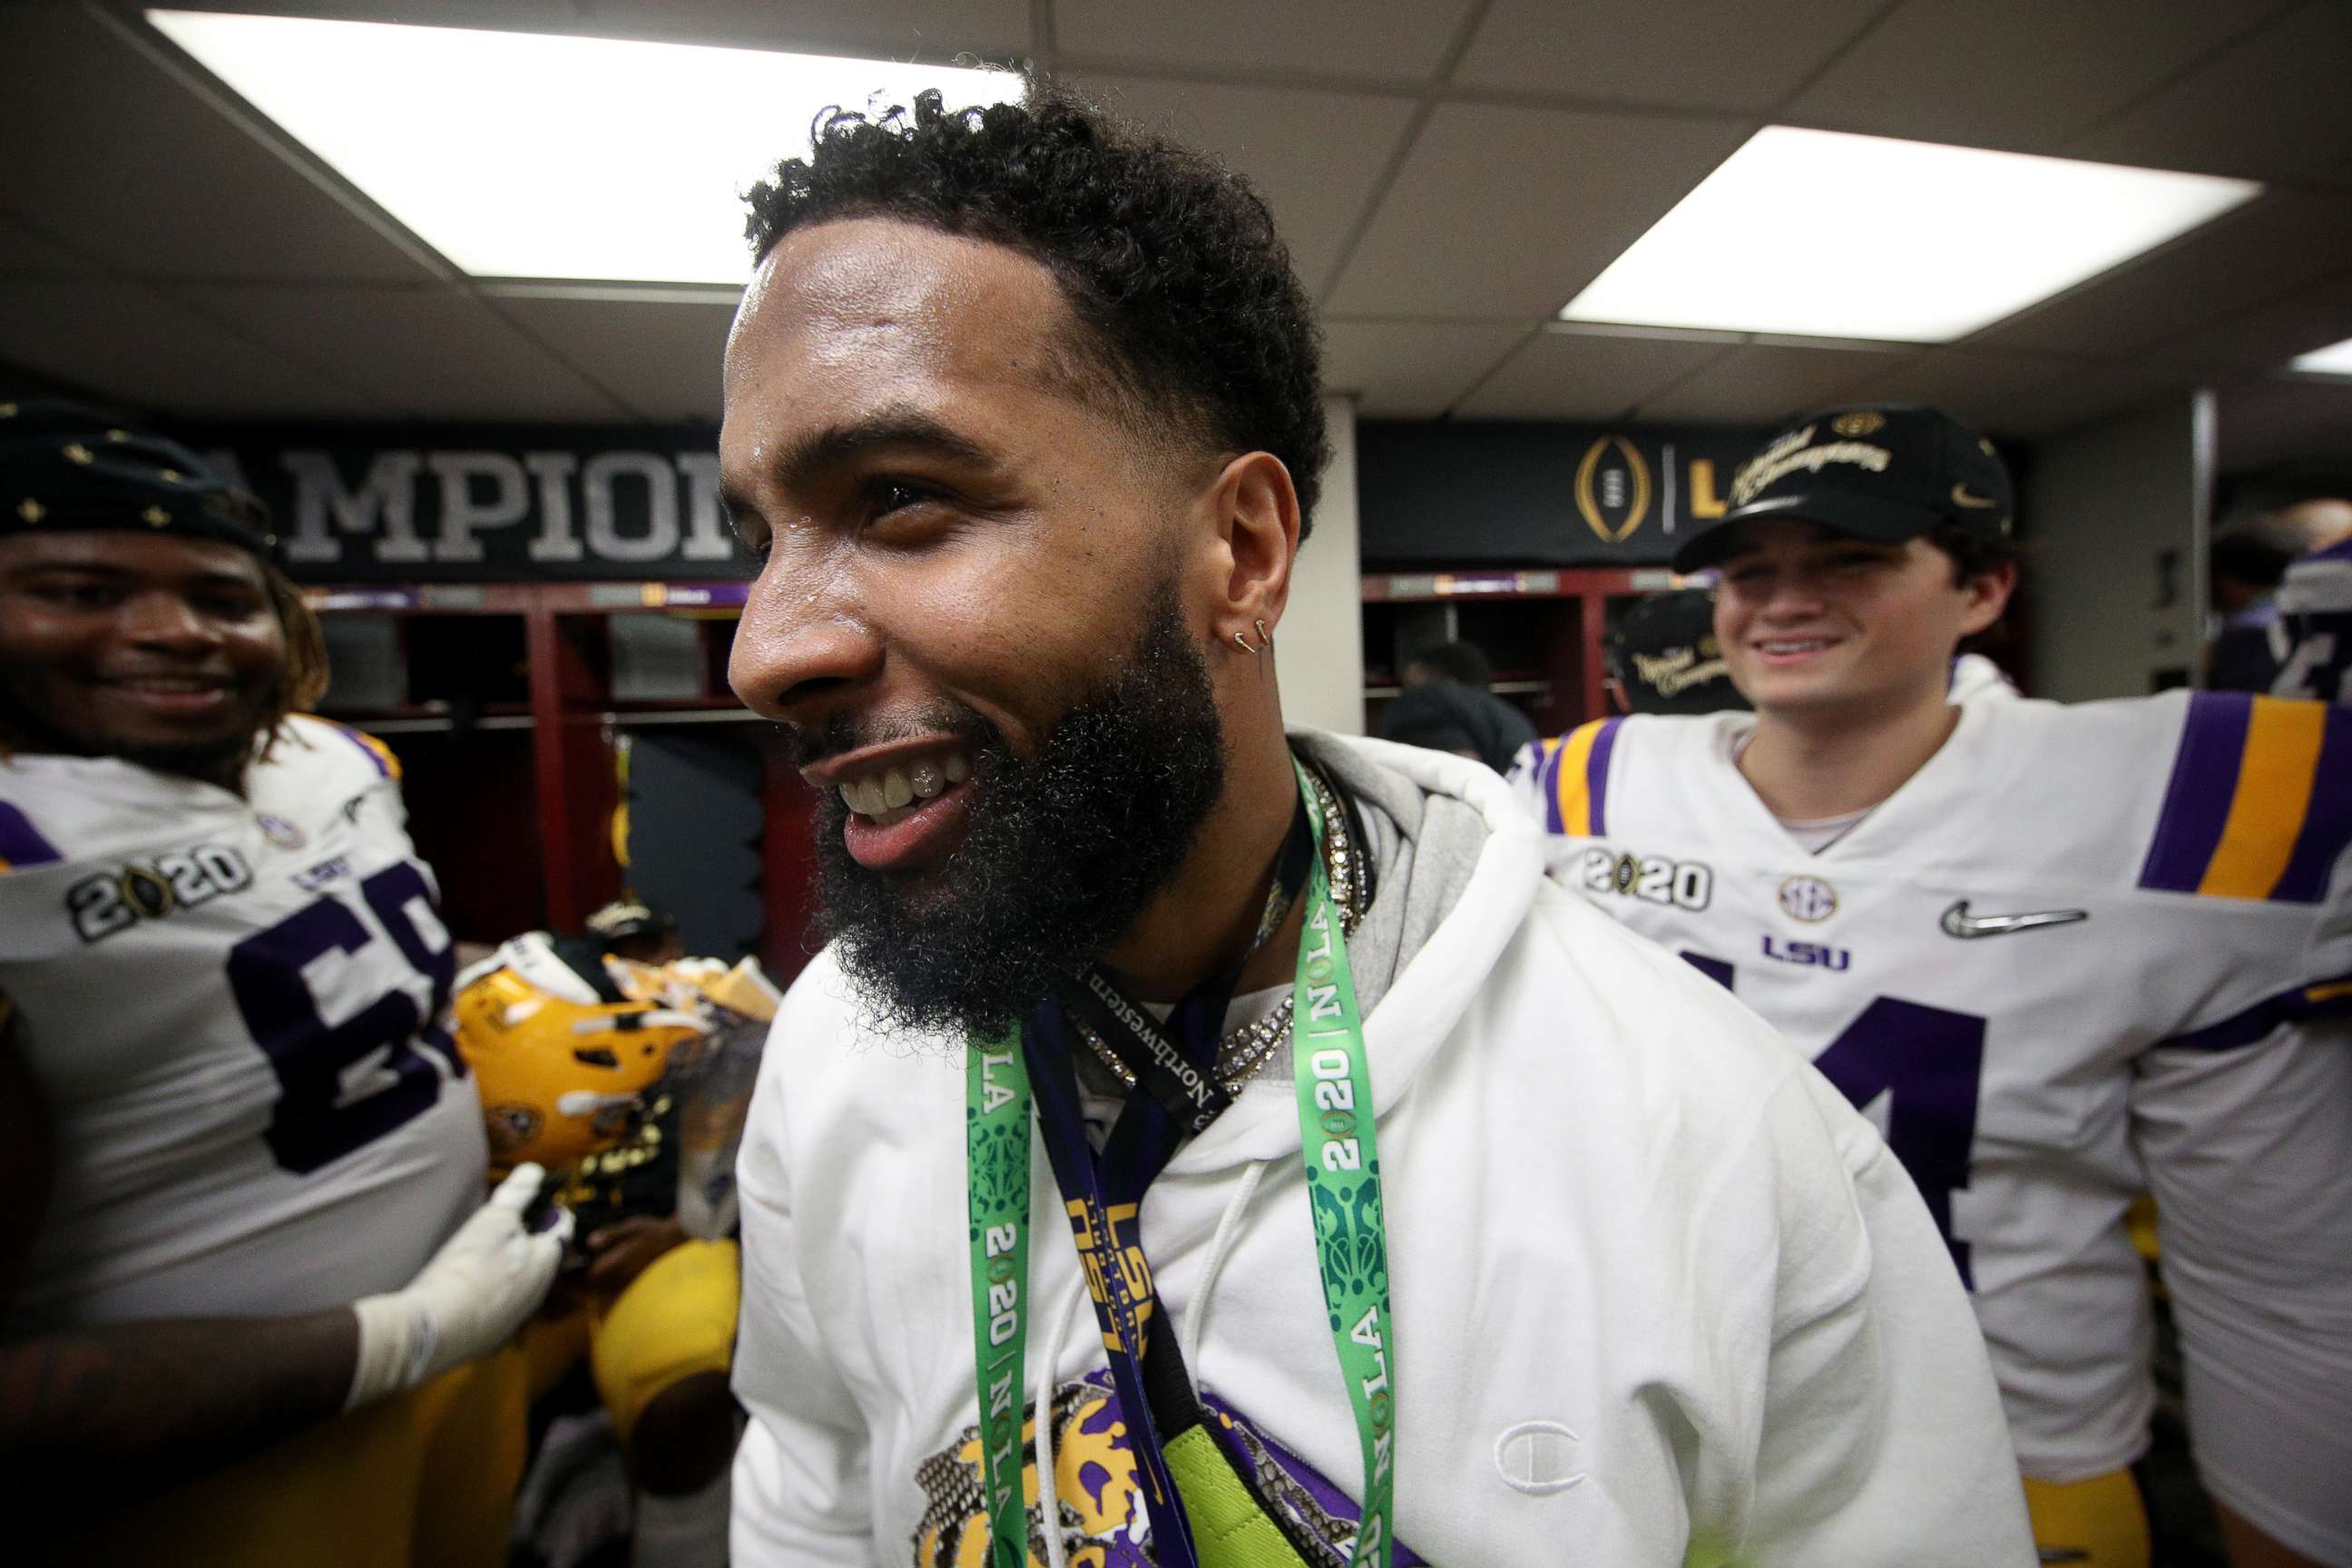 PHOTO: Odell Beckham Jr. celebrates in the locker room of the LSU Tigers after their 42-25 win over Clemson Tigers in the College Football Playoff National Championship game at Mercedes Benz Superdome, Jan. 13, 2020, in New Orleans.